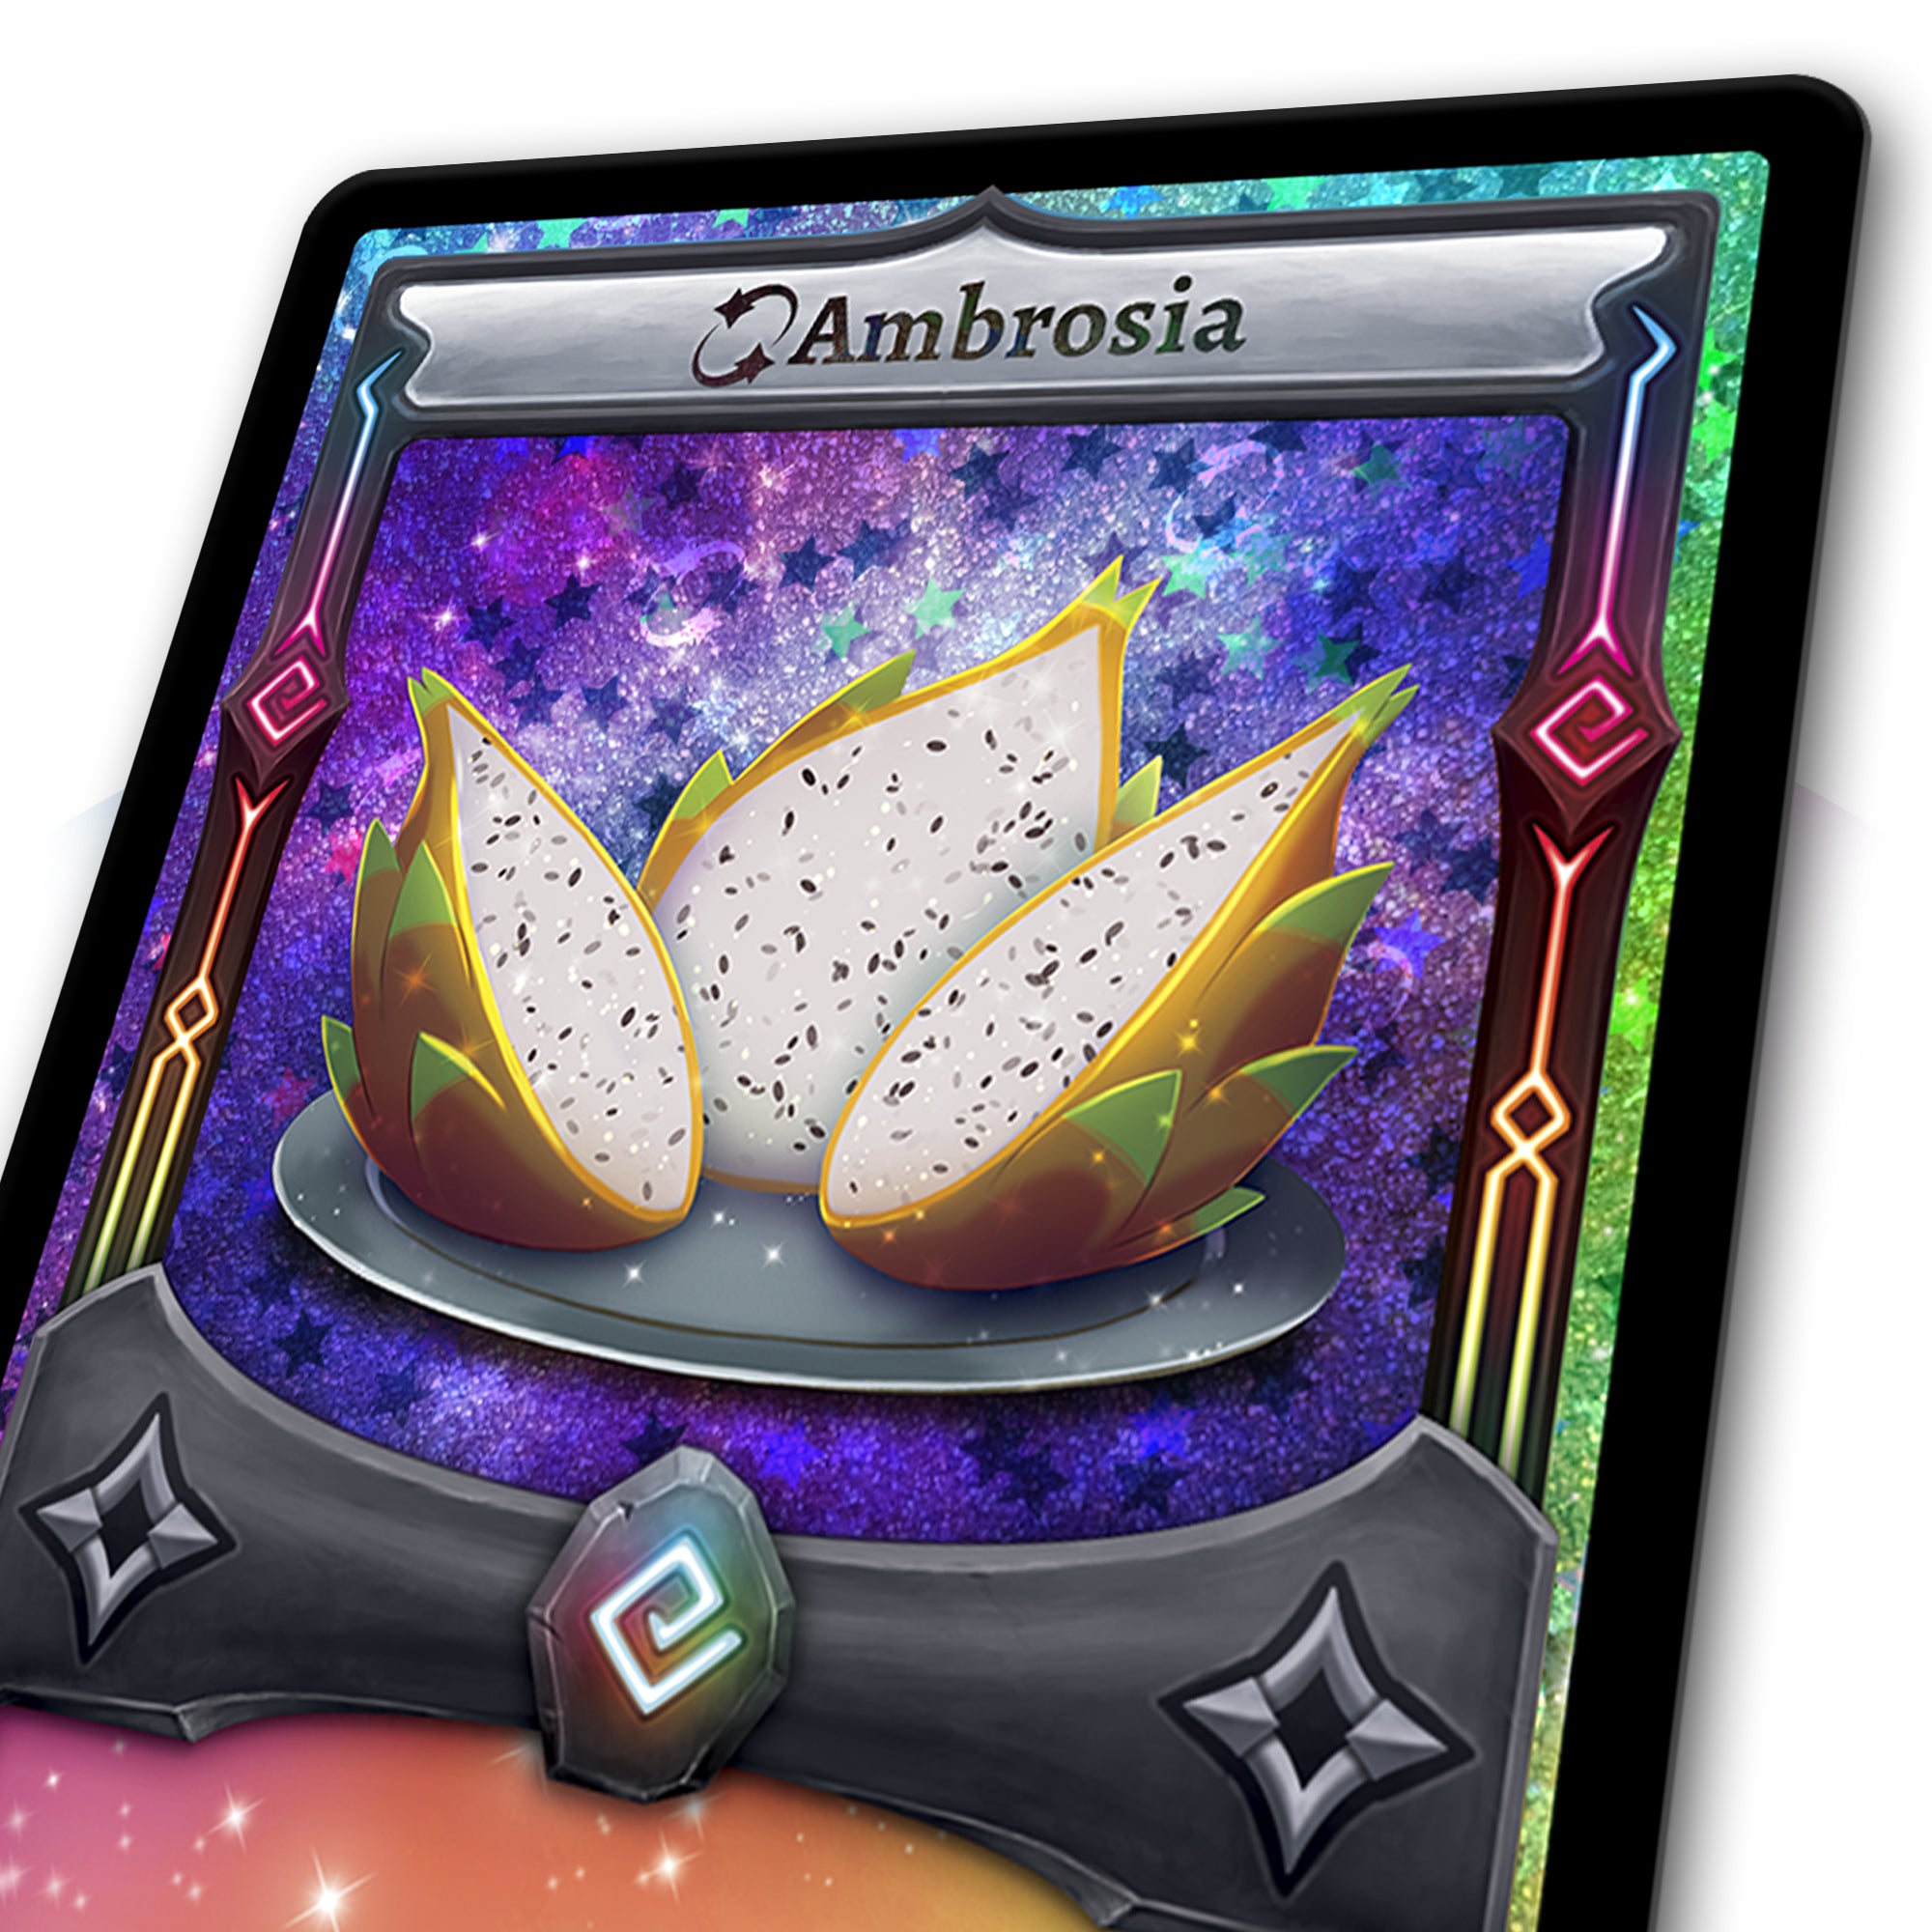 Base Set Blister Pack with Stellar Ambrosia - 1st Edition